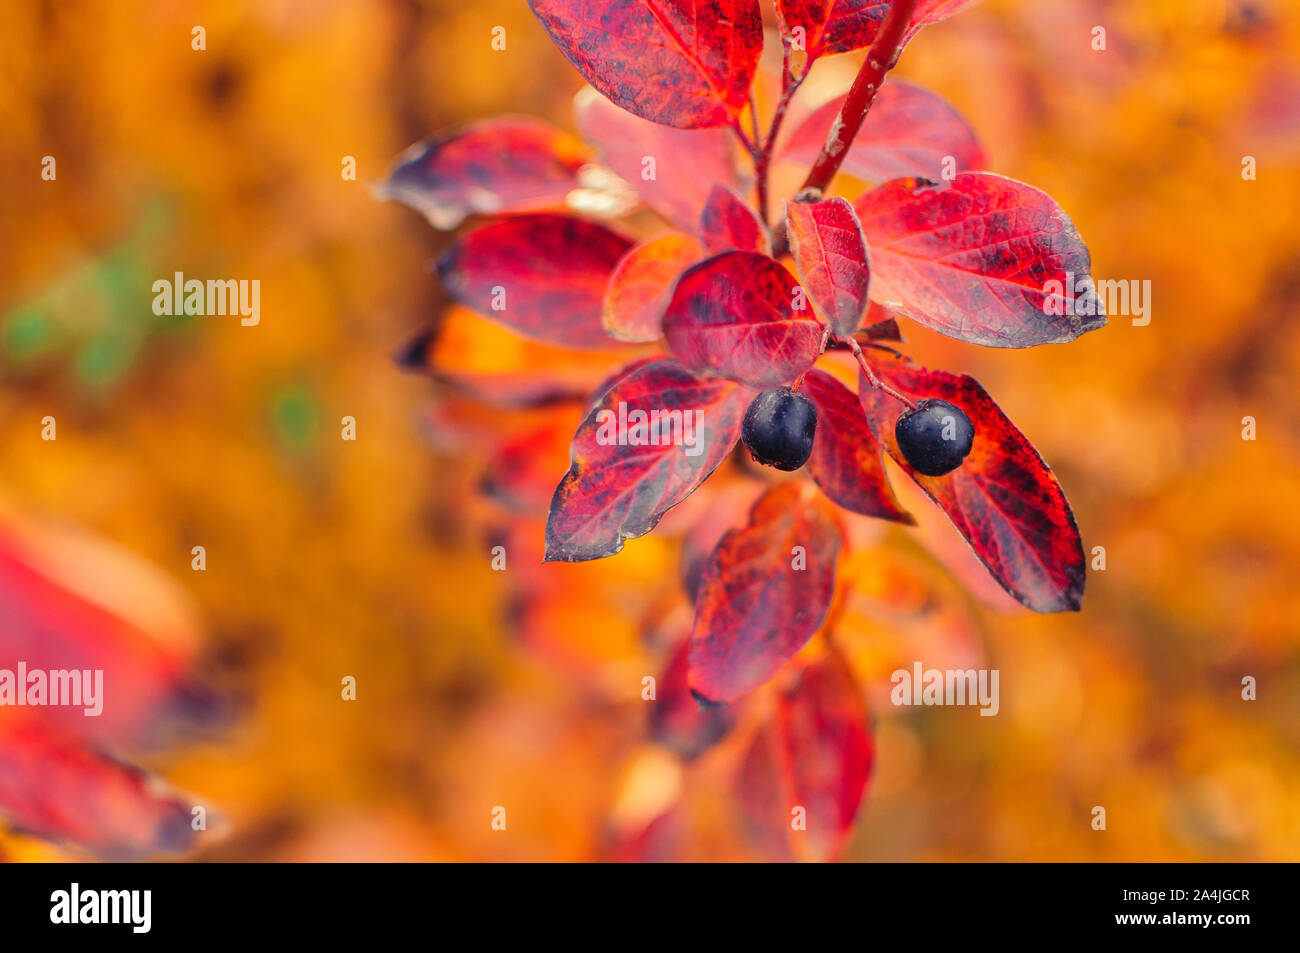 Berry on cotoneaster branch on a fall bokeh background. Autumn colorful leaves of red, yellow, orange. Bearberry bush with autumn leaves close-up Stock Photo